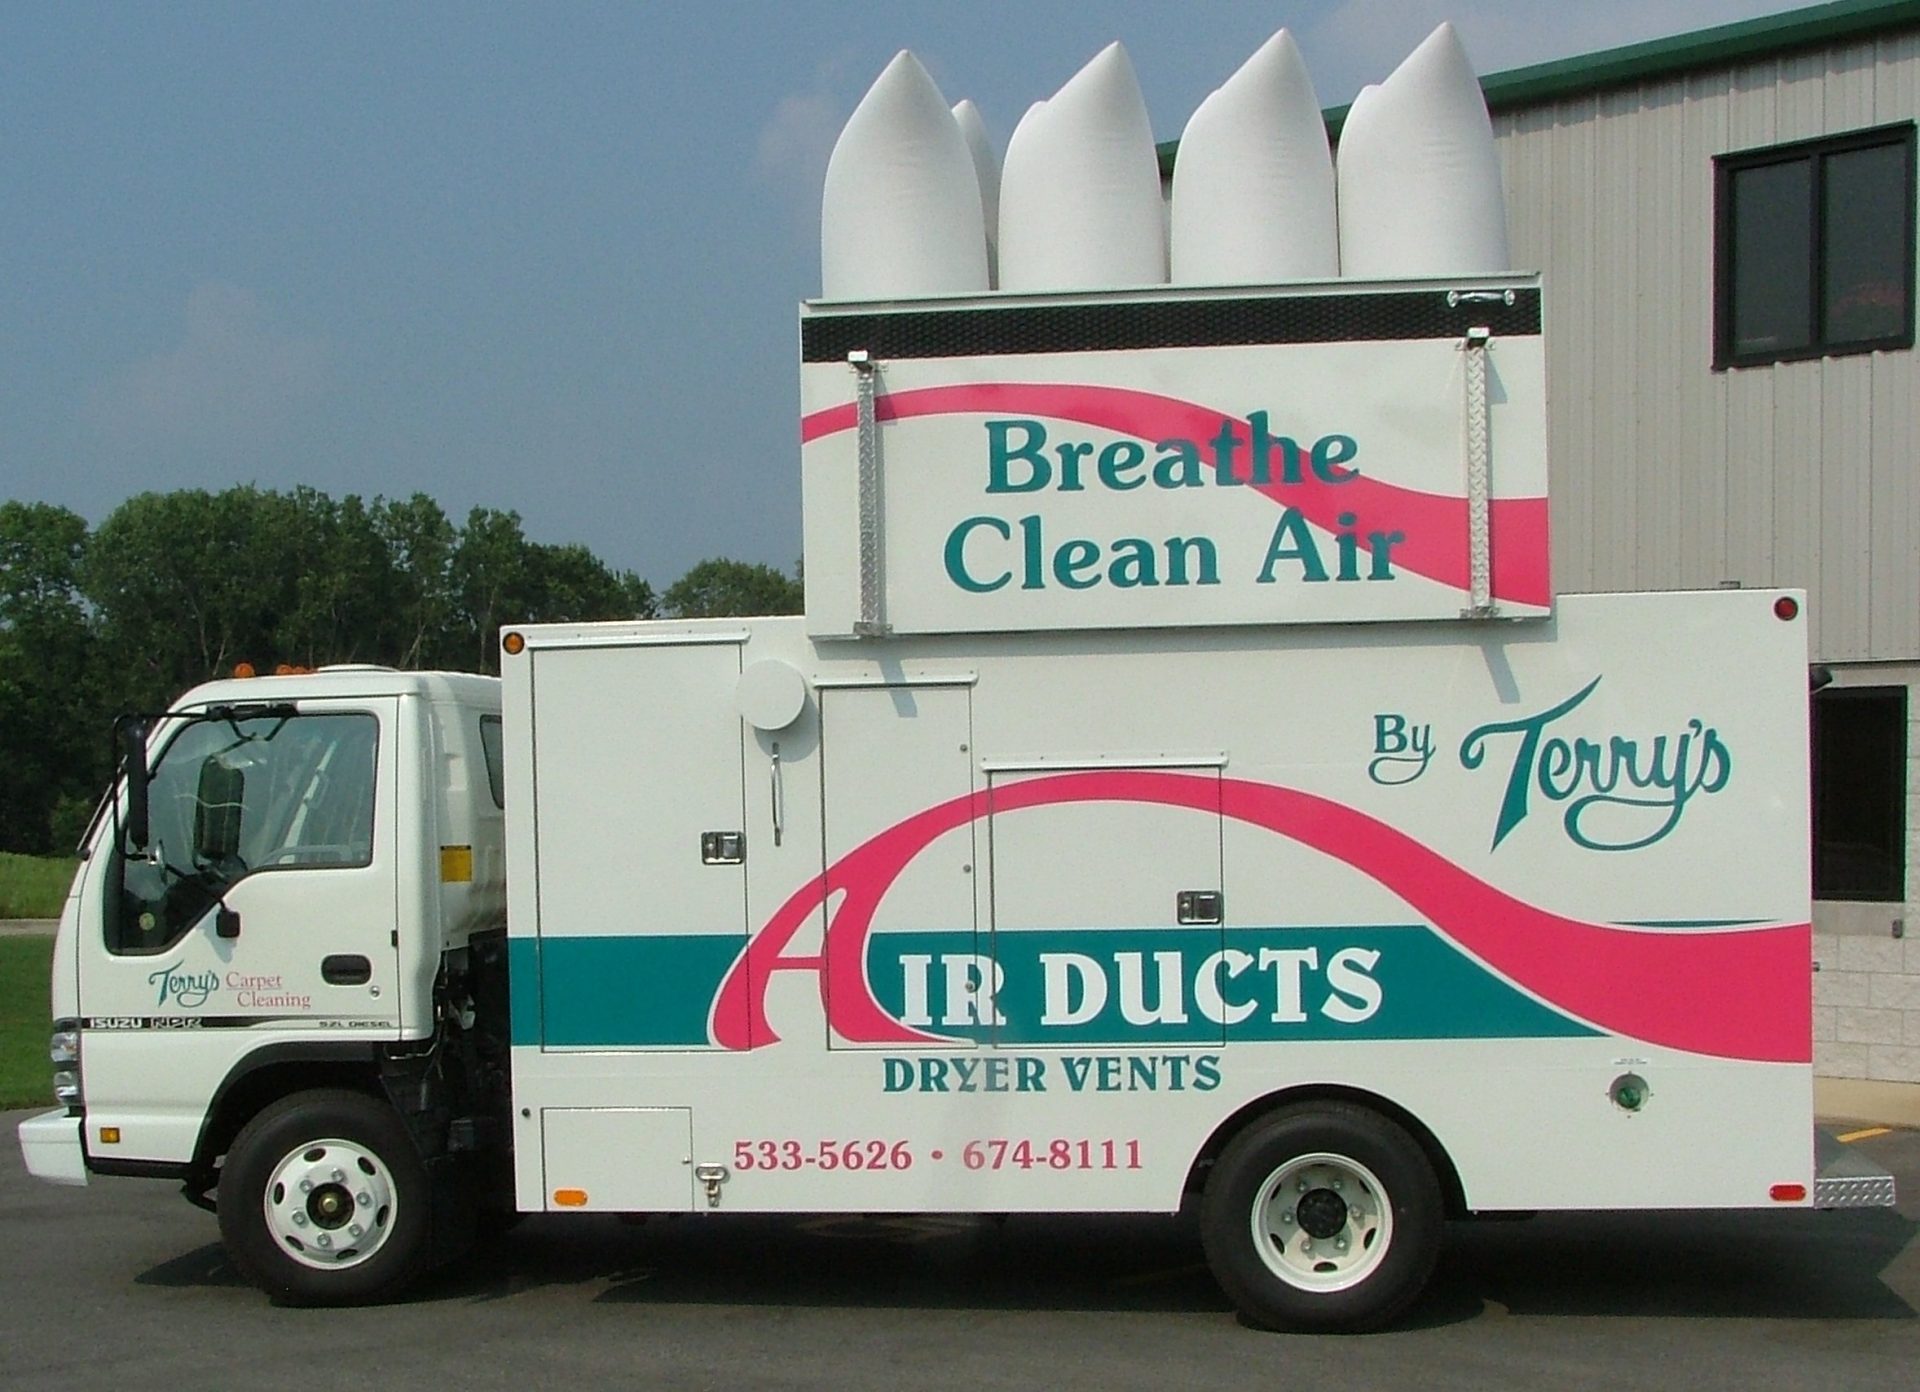 Air Duct Cleaning Truck